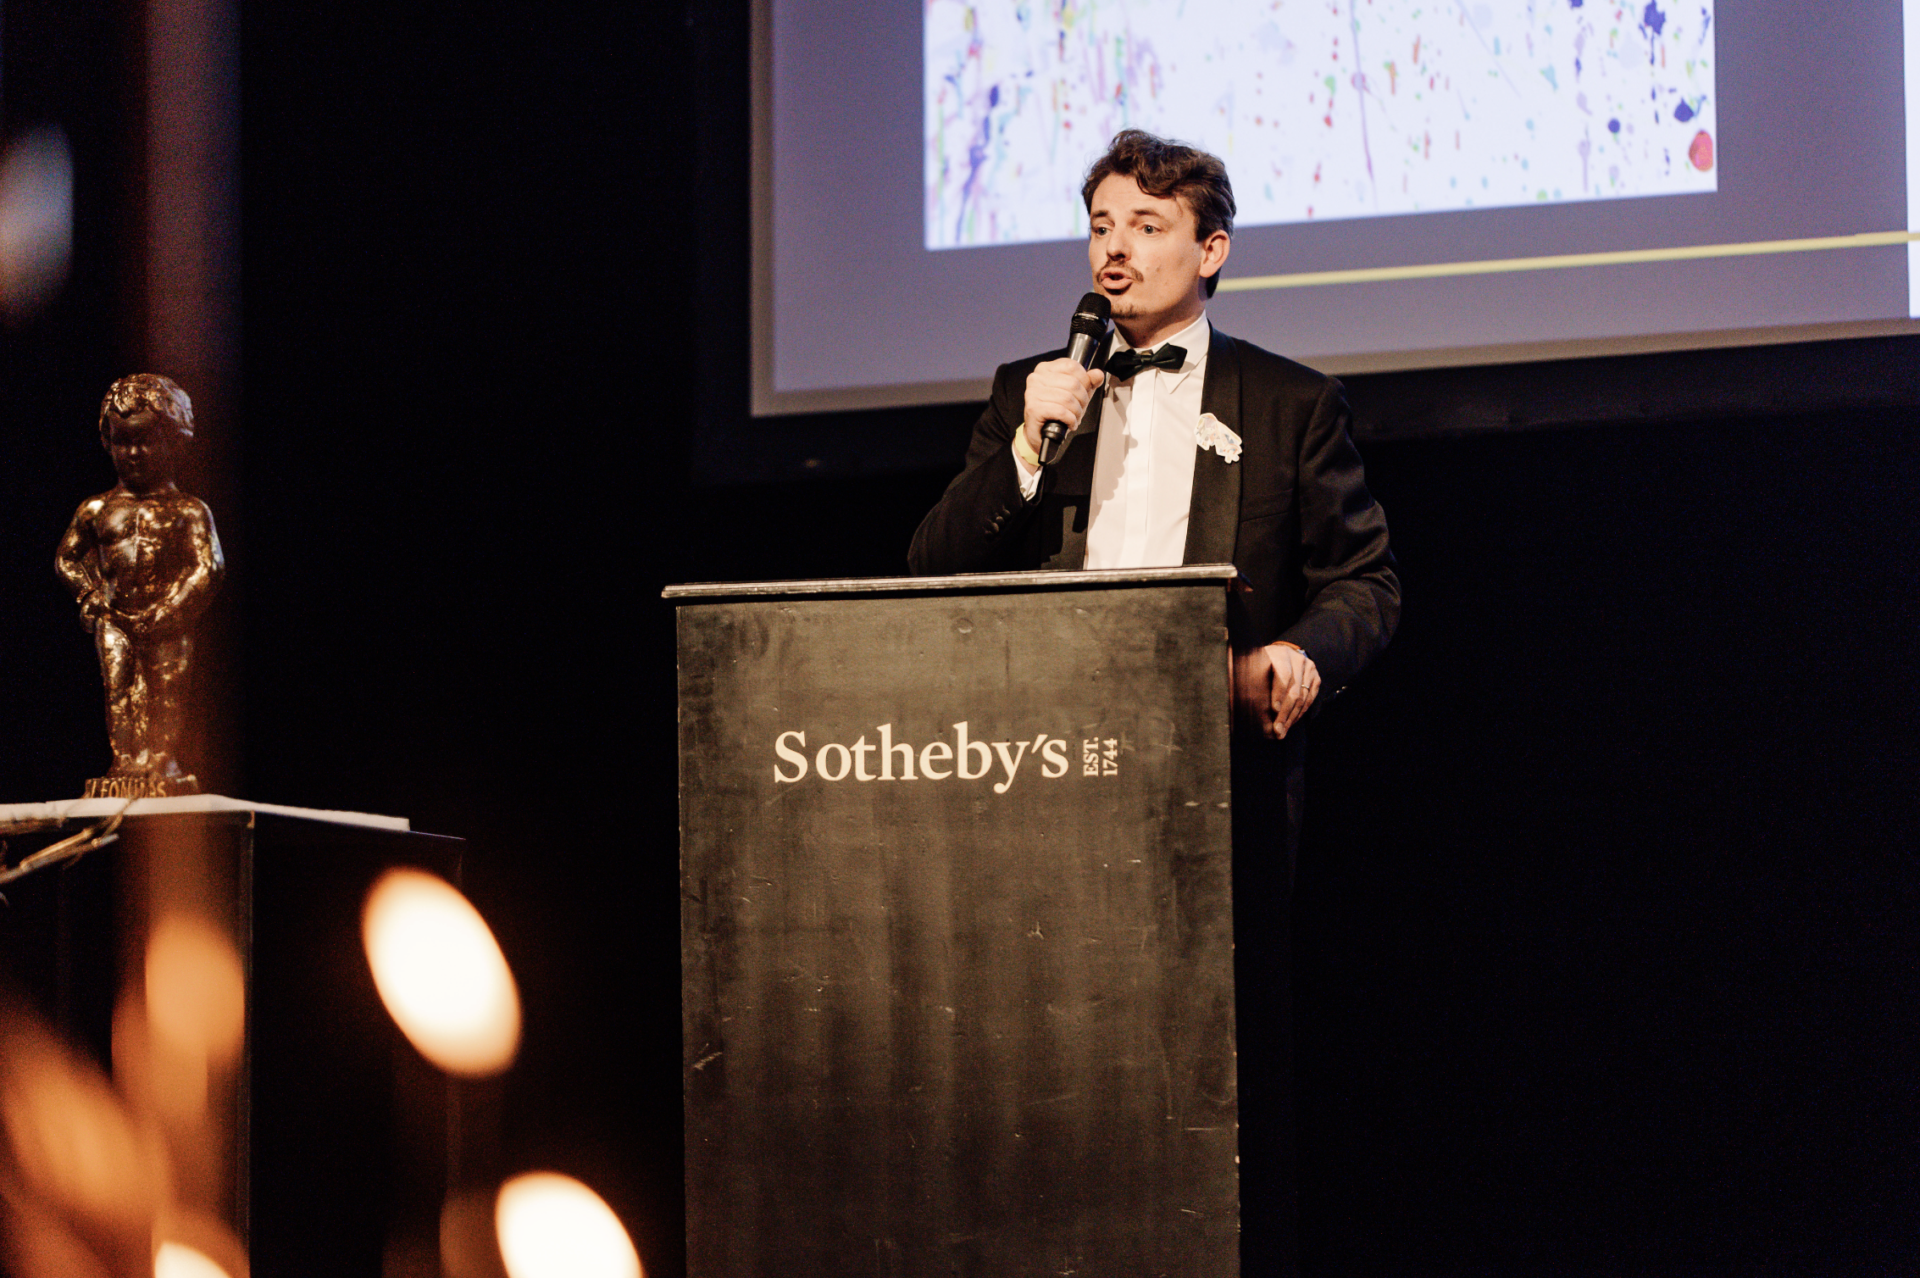 Emmanuel van De Putte from Sotheby's auction giving an introduction to the auction of the night.